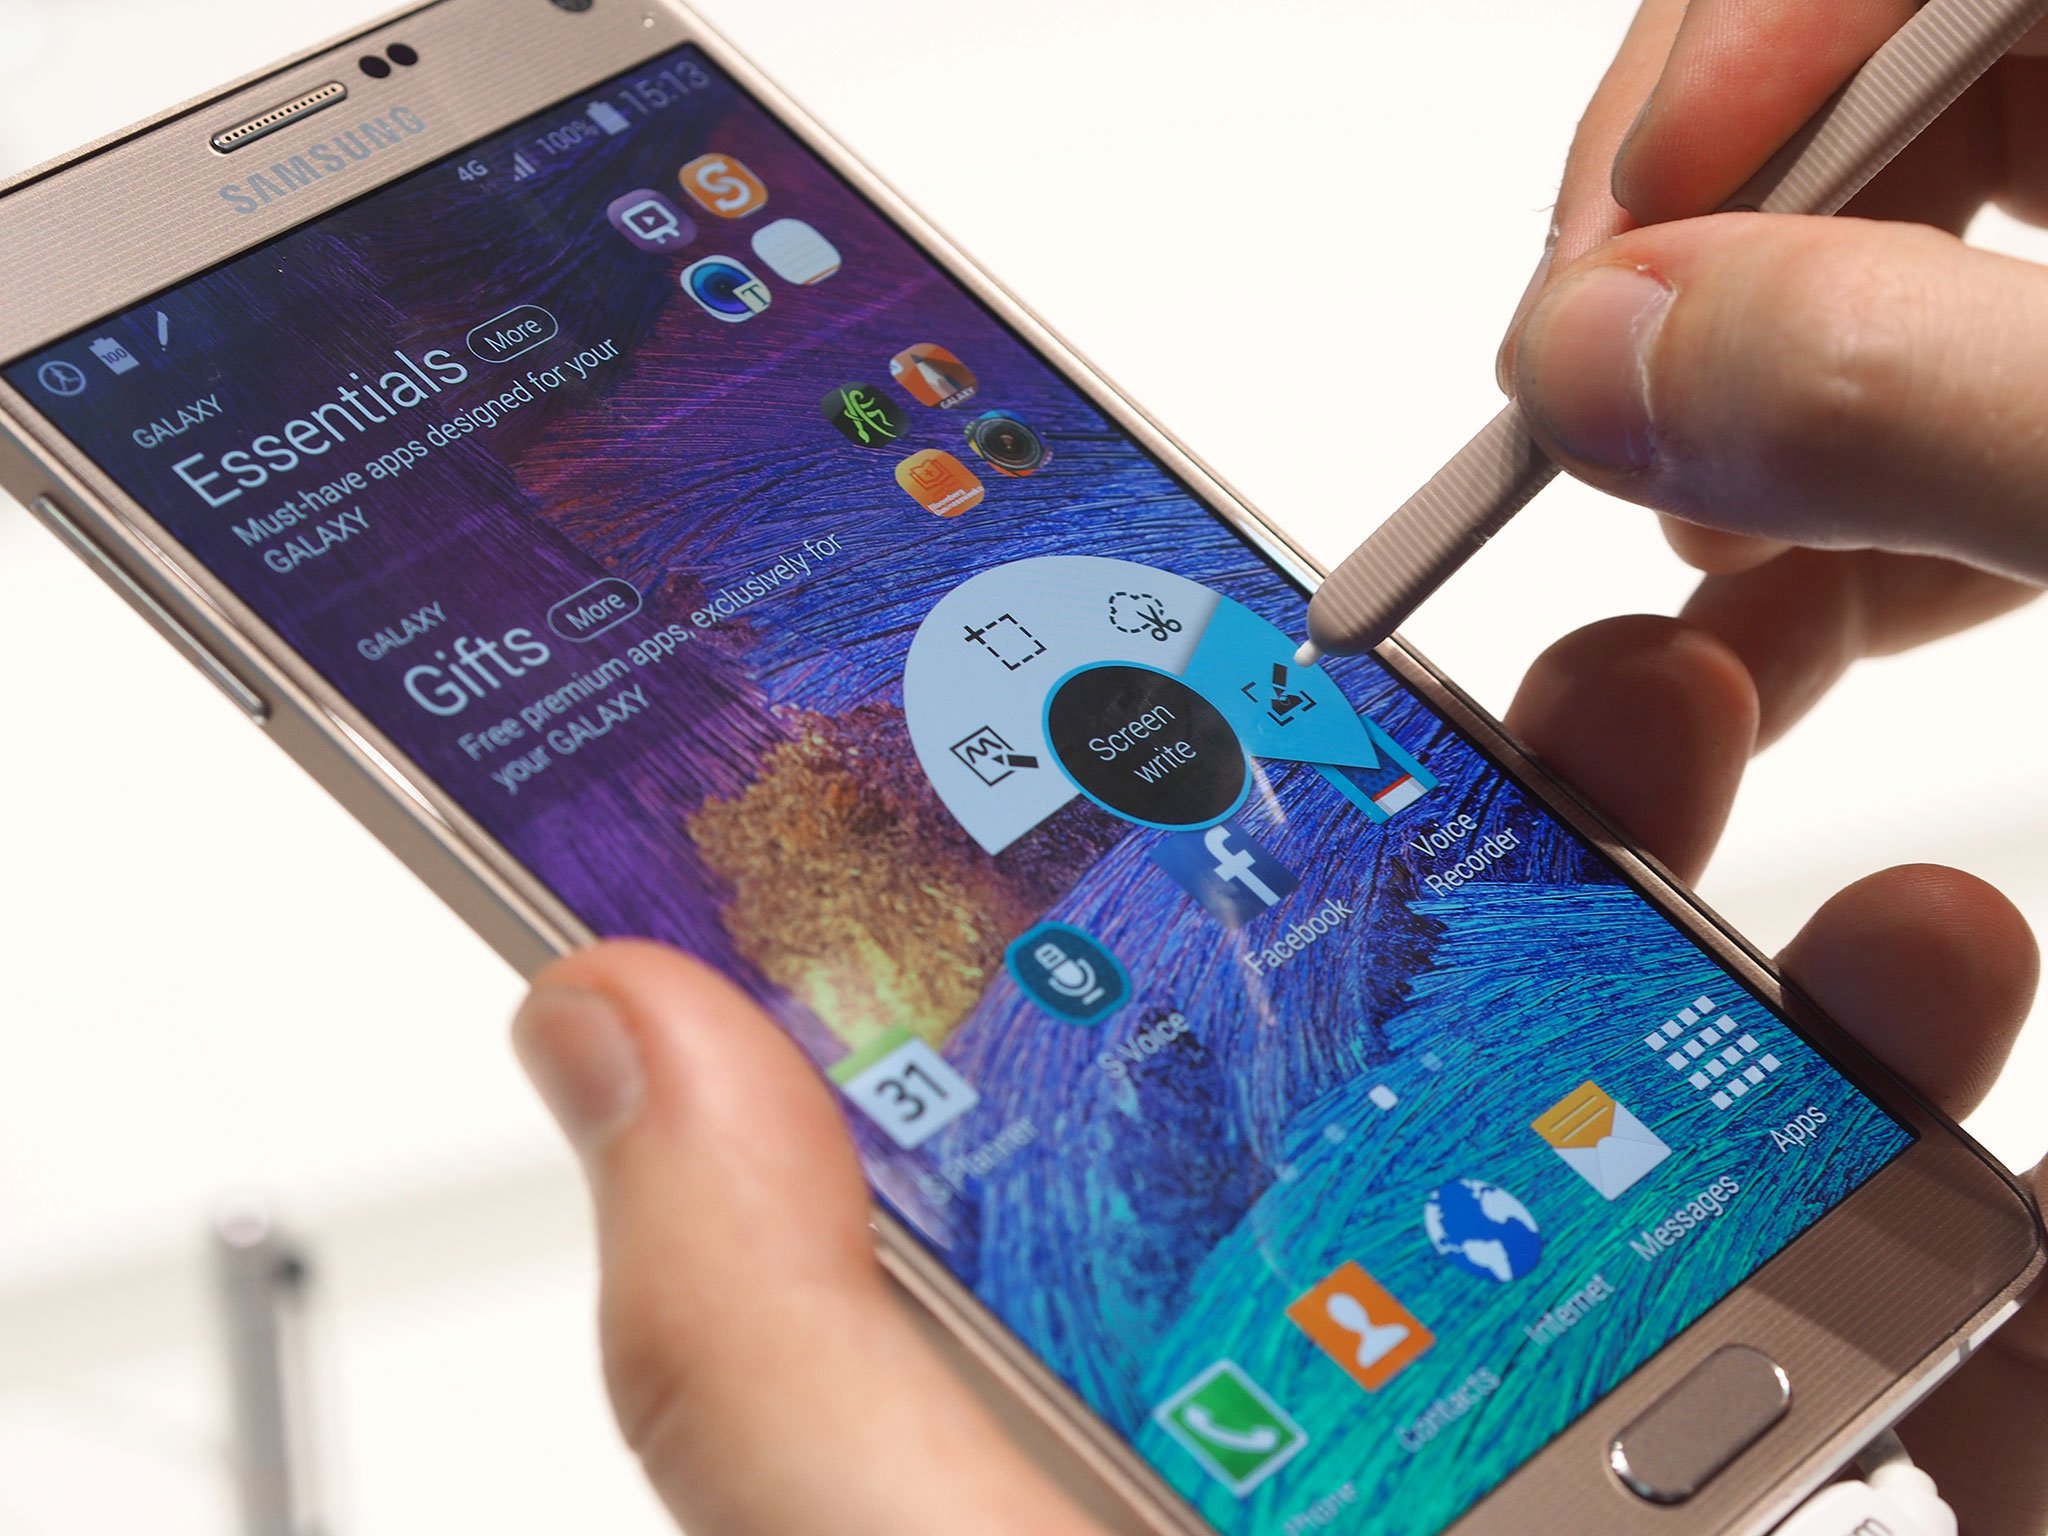 Samsung Galaxy Note 4 to come with bonus business card holder?